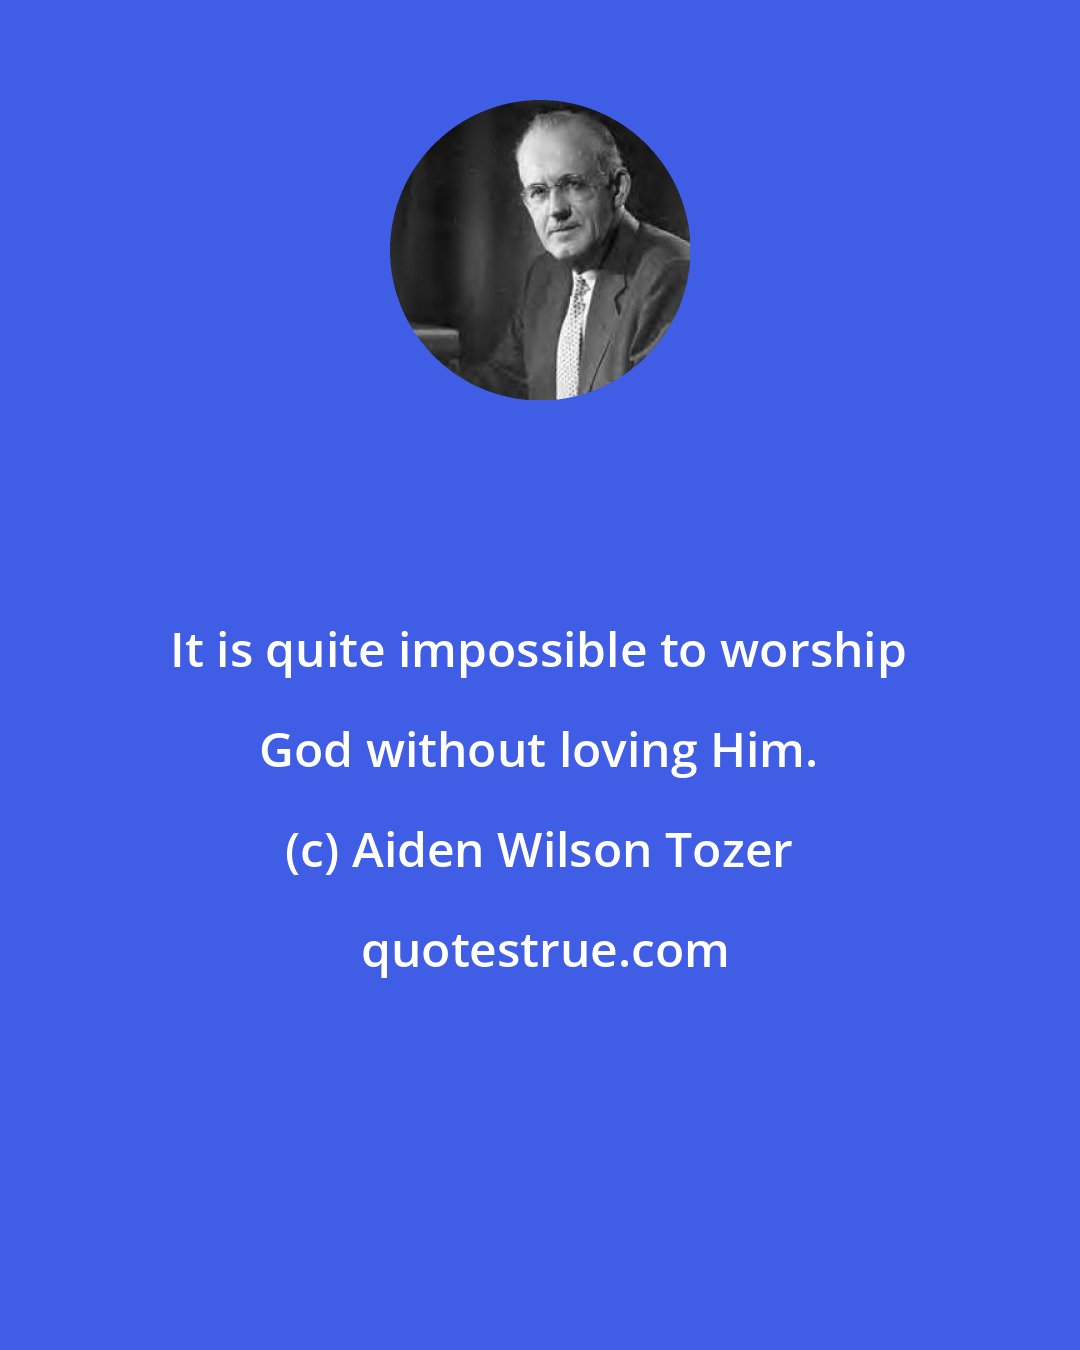 Aiden Wilson Tozer: It is quite impossible to worship God without loving Him.